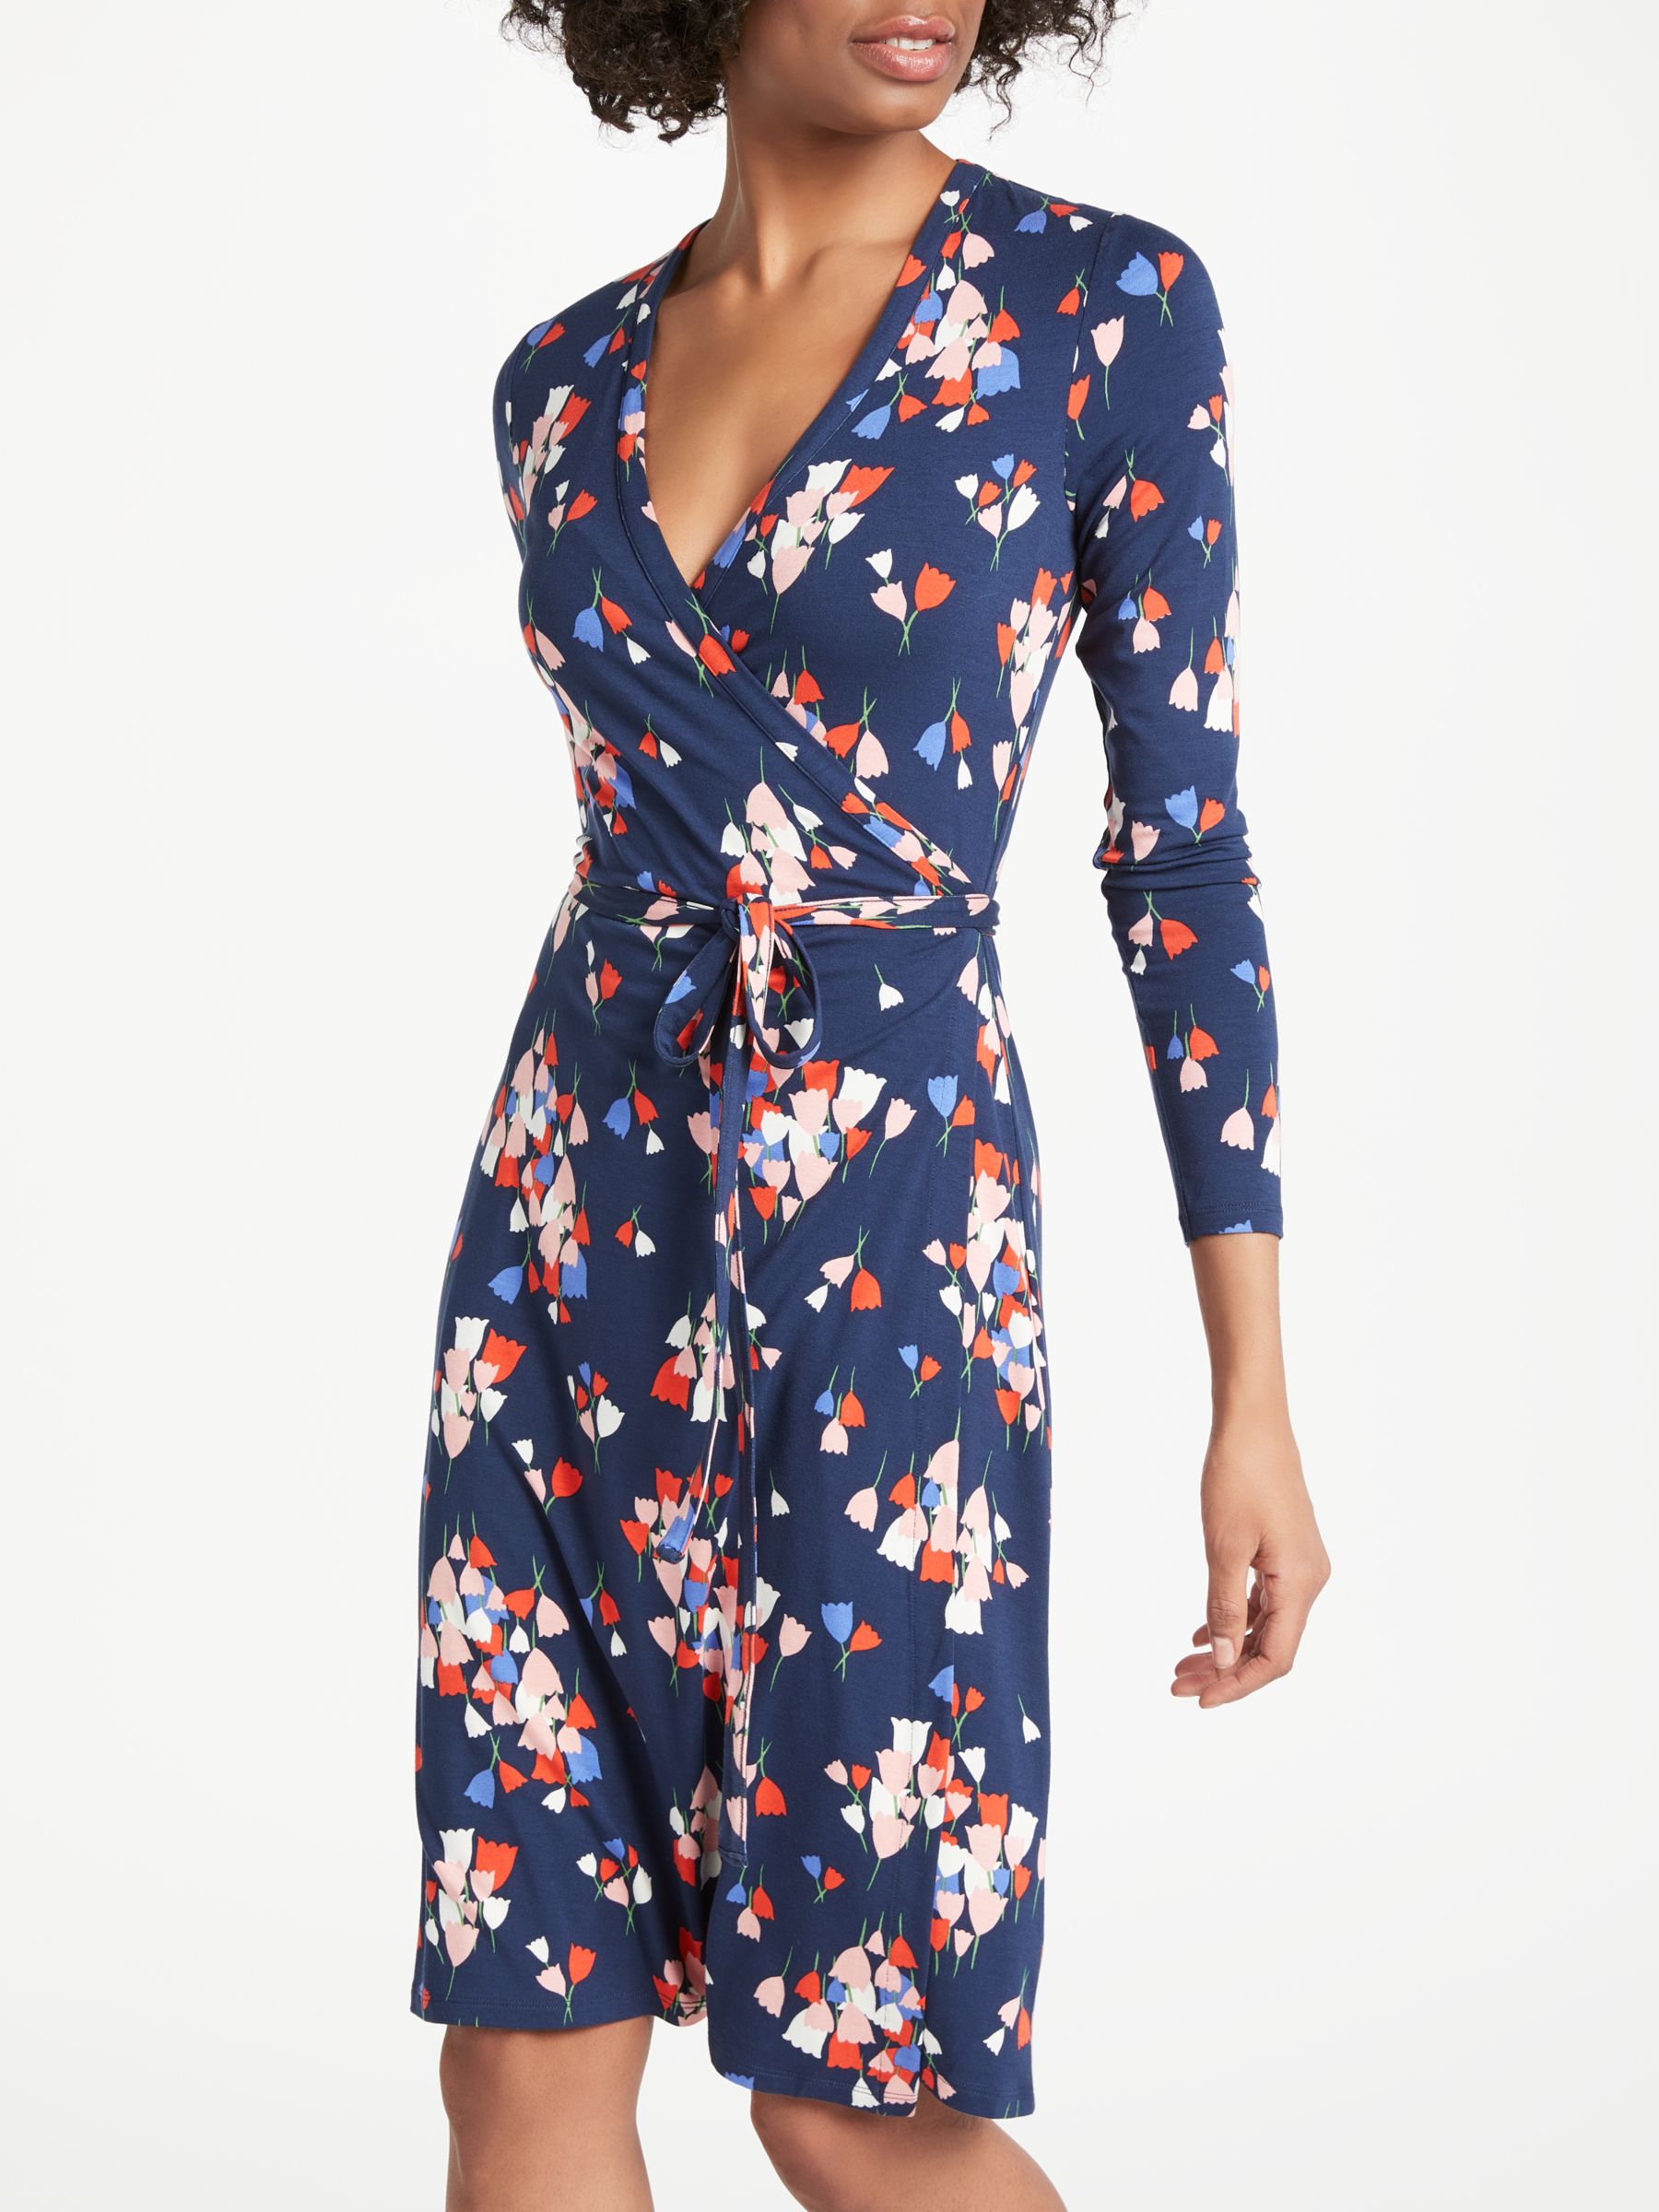 Boden Wrap Jersey Dress, Navy Tulip at 